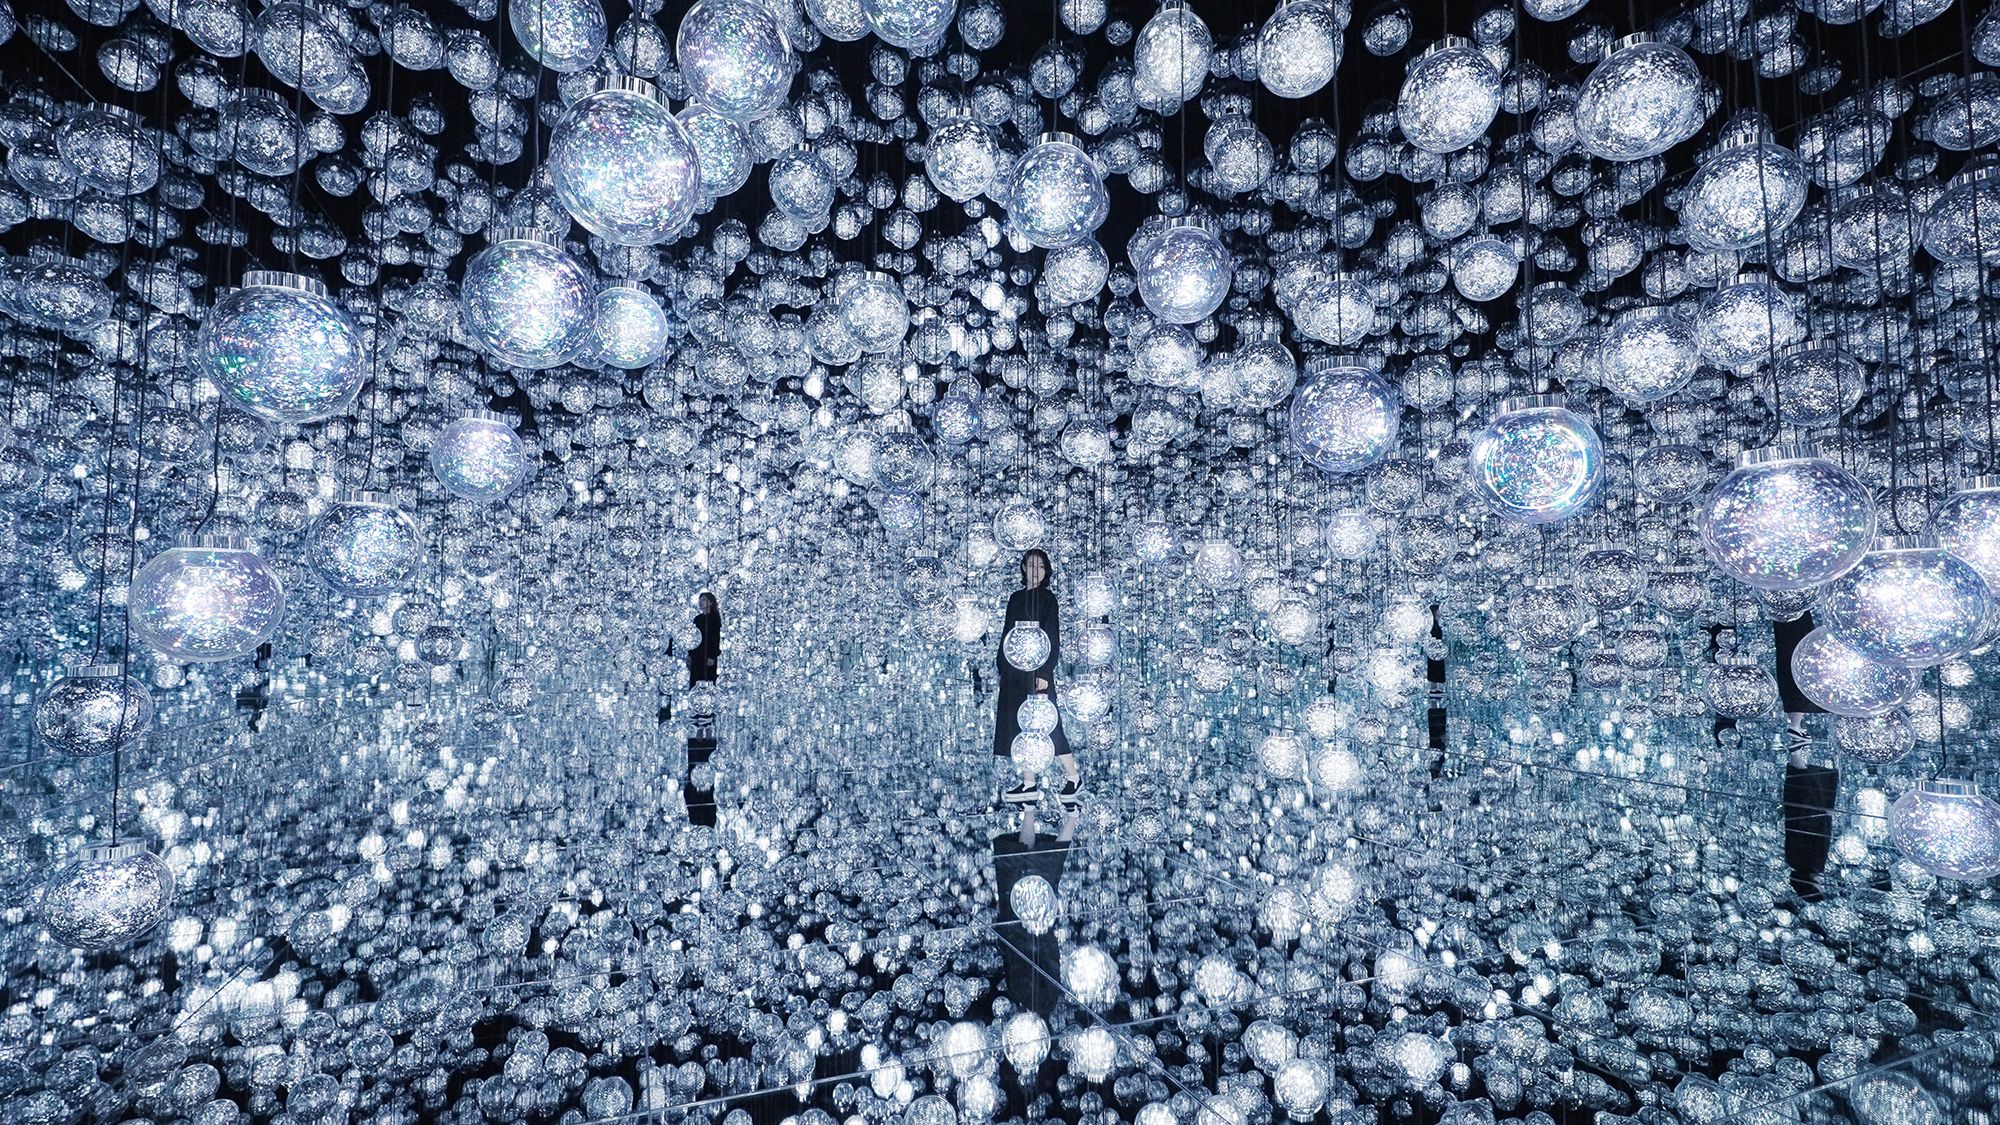 The immersive "Bubble Universe" is among dozens of installations on show at teamLab's new museum space in Tokyo.